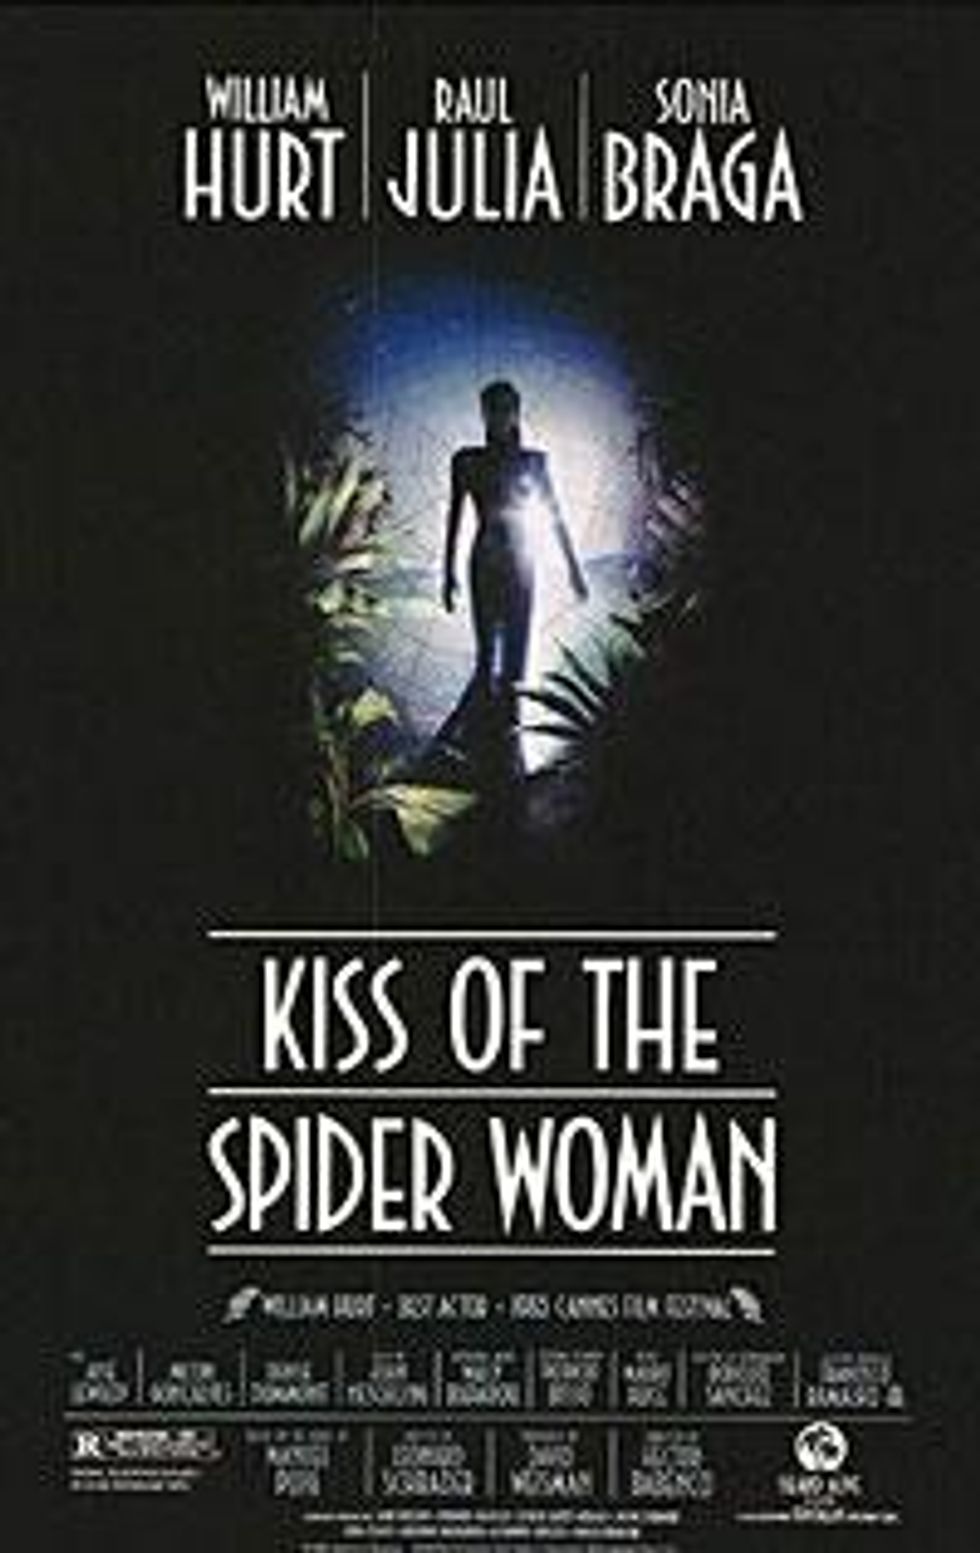 Kiss_of_the_spider_womanx200_0